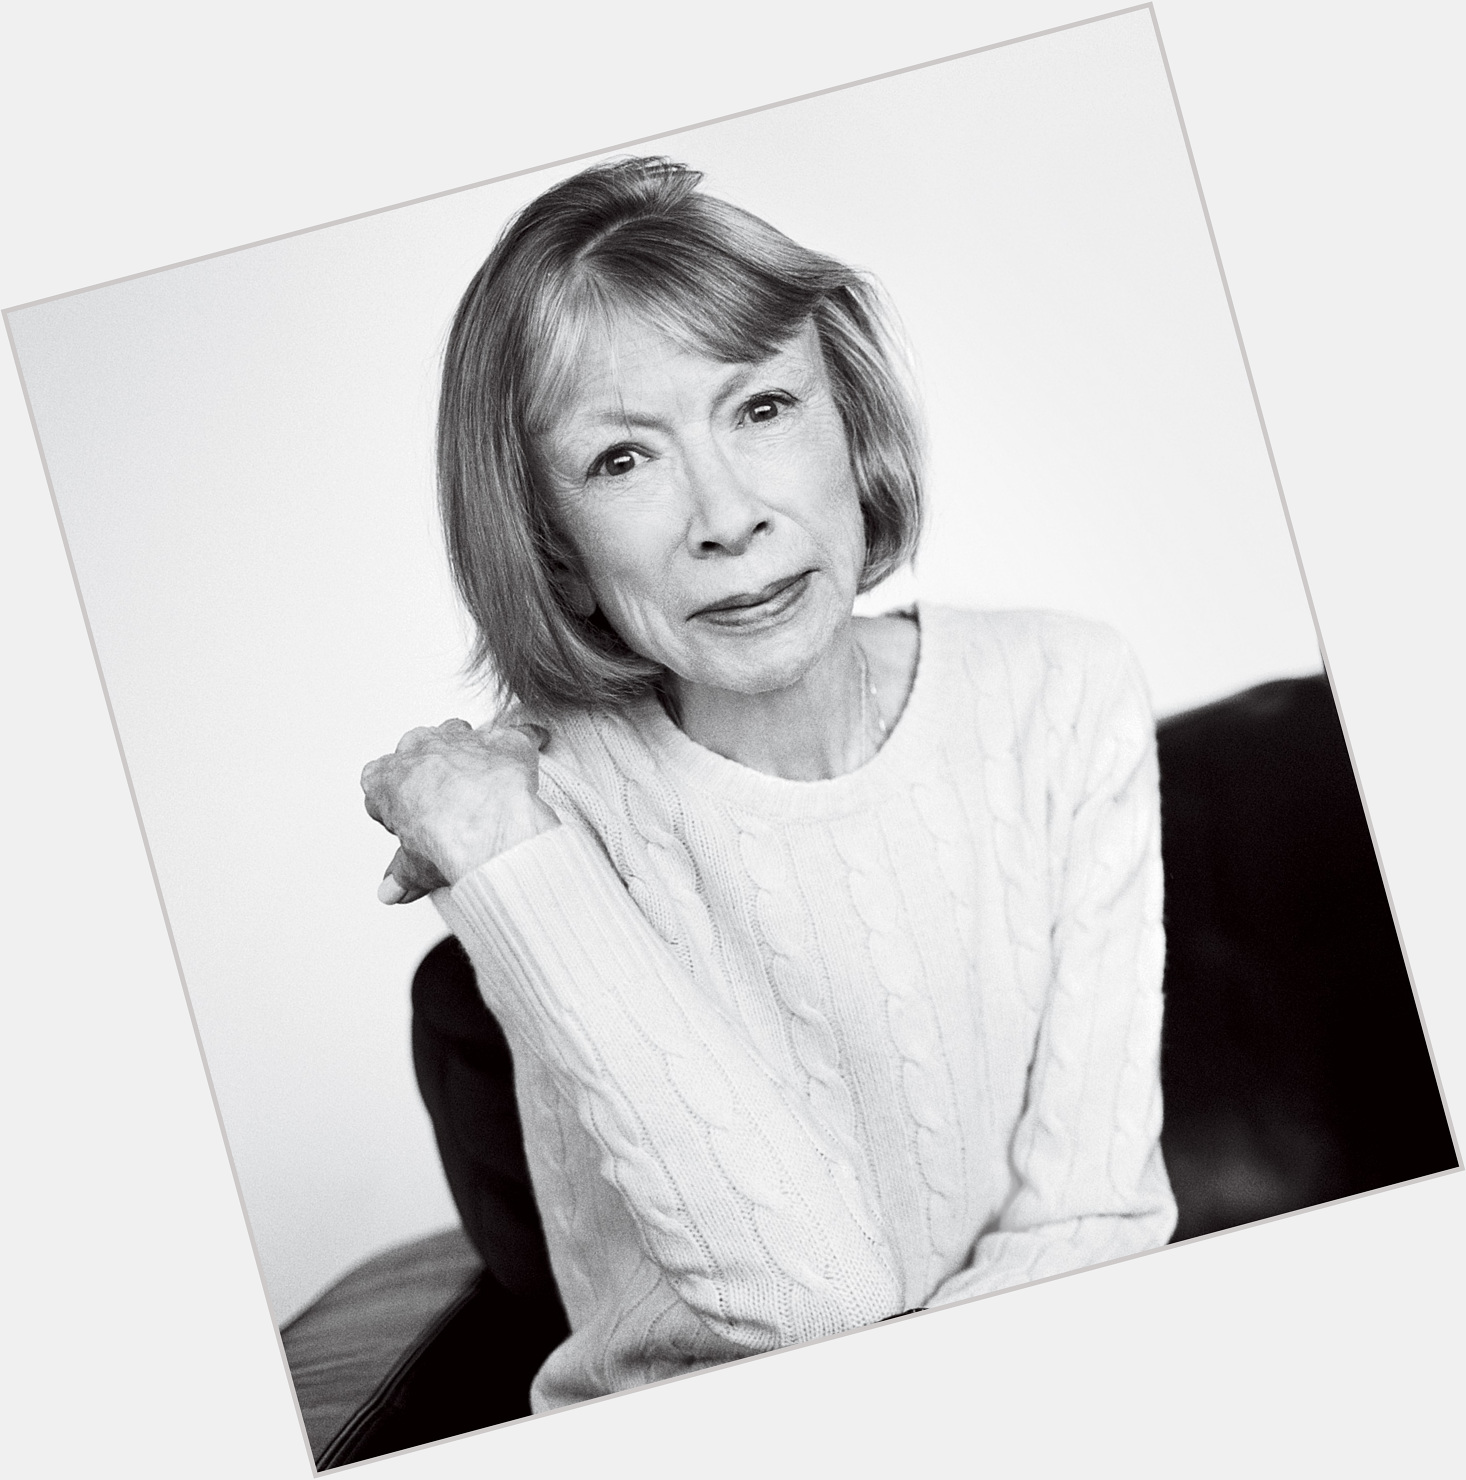 Happy birthday, Joan Didion. (I hope she is doing well.) 